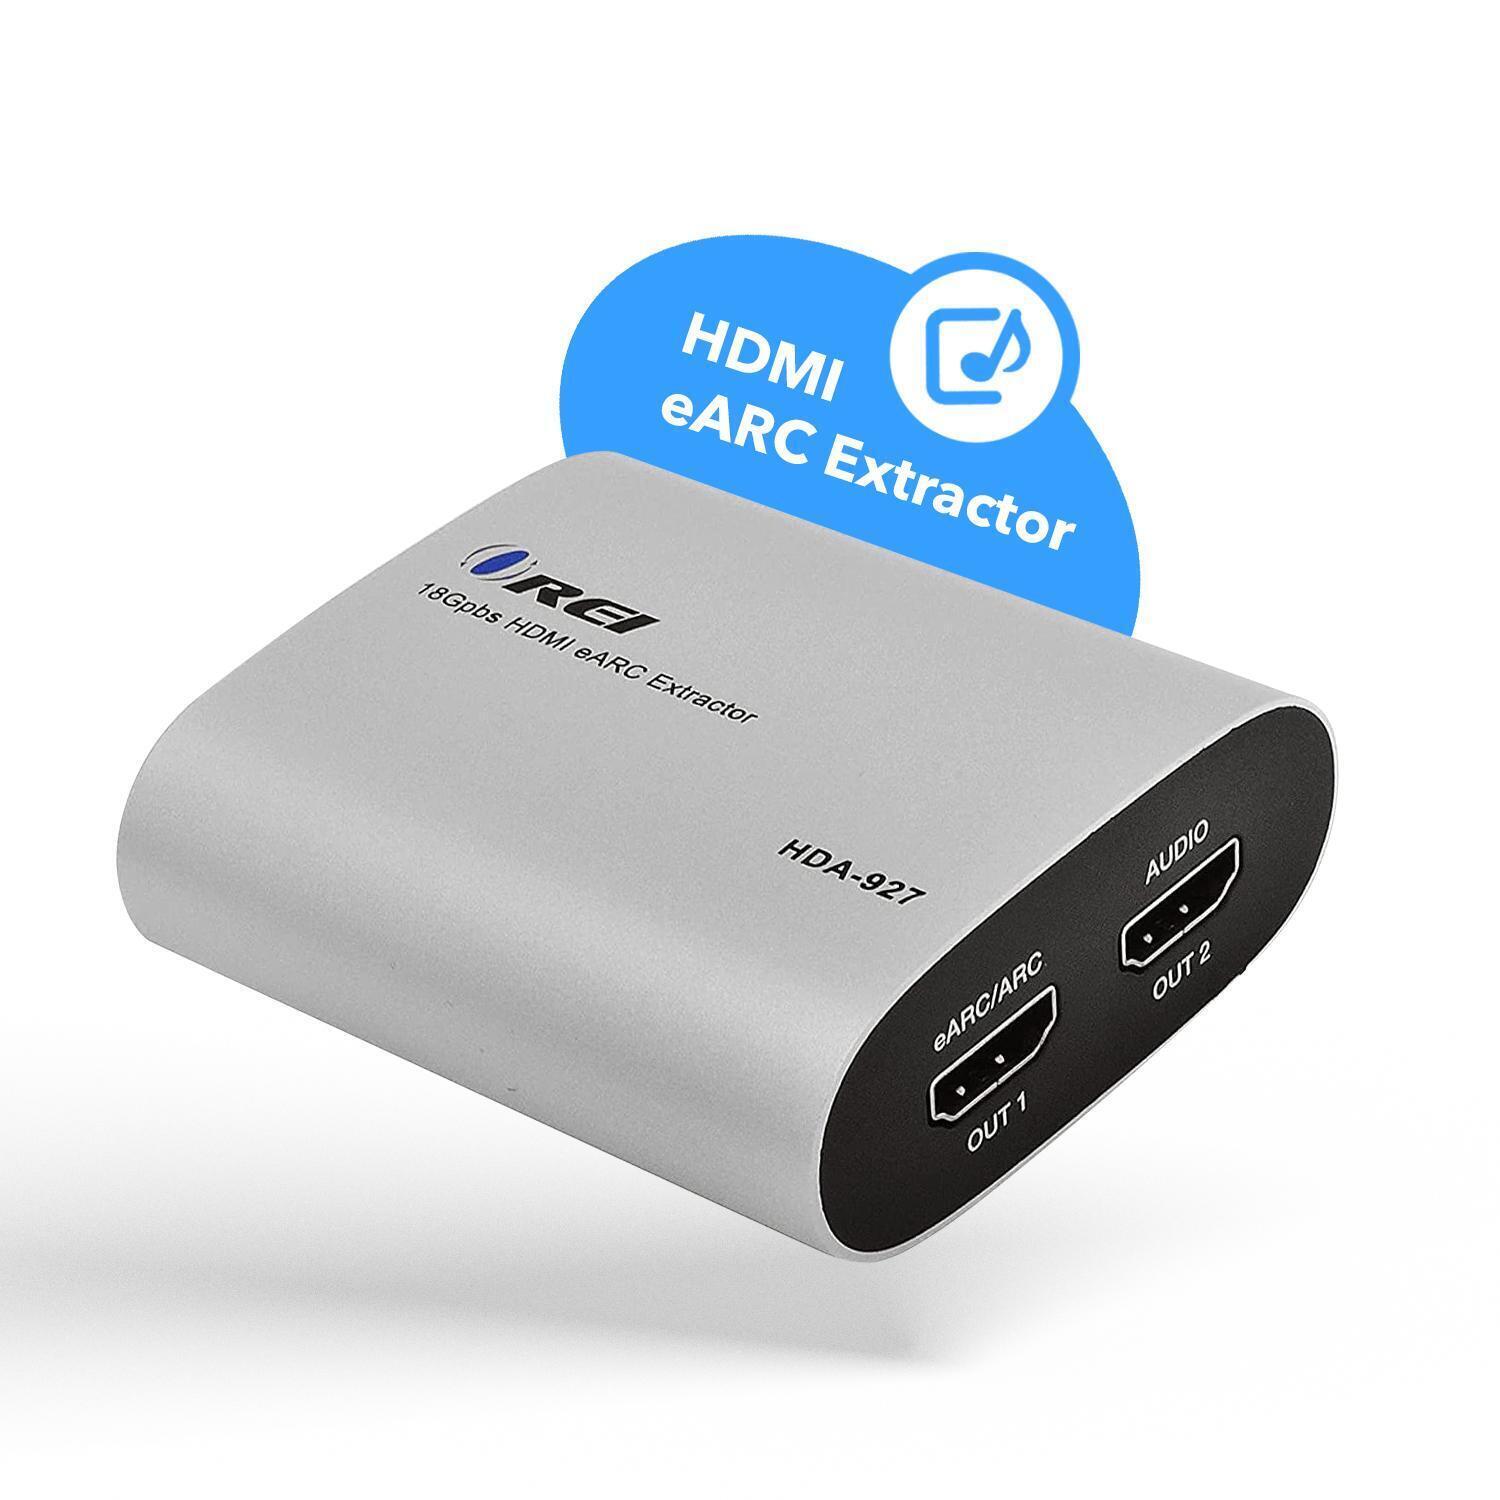 OREI eARC 4K 60Hz Audio Extractor Converter 18G HDMI 2.0 ARC Support - HDCP 2.2 - Dolby Digital/DTS Passthrough CEC, HDR, Dolby Vision HDR10 Support (HDA-927) alternate image